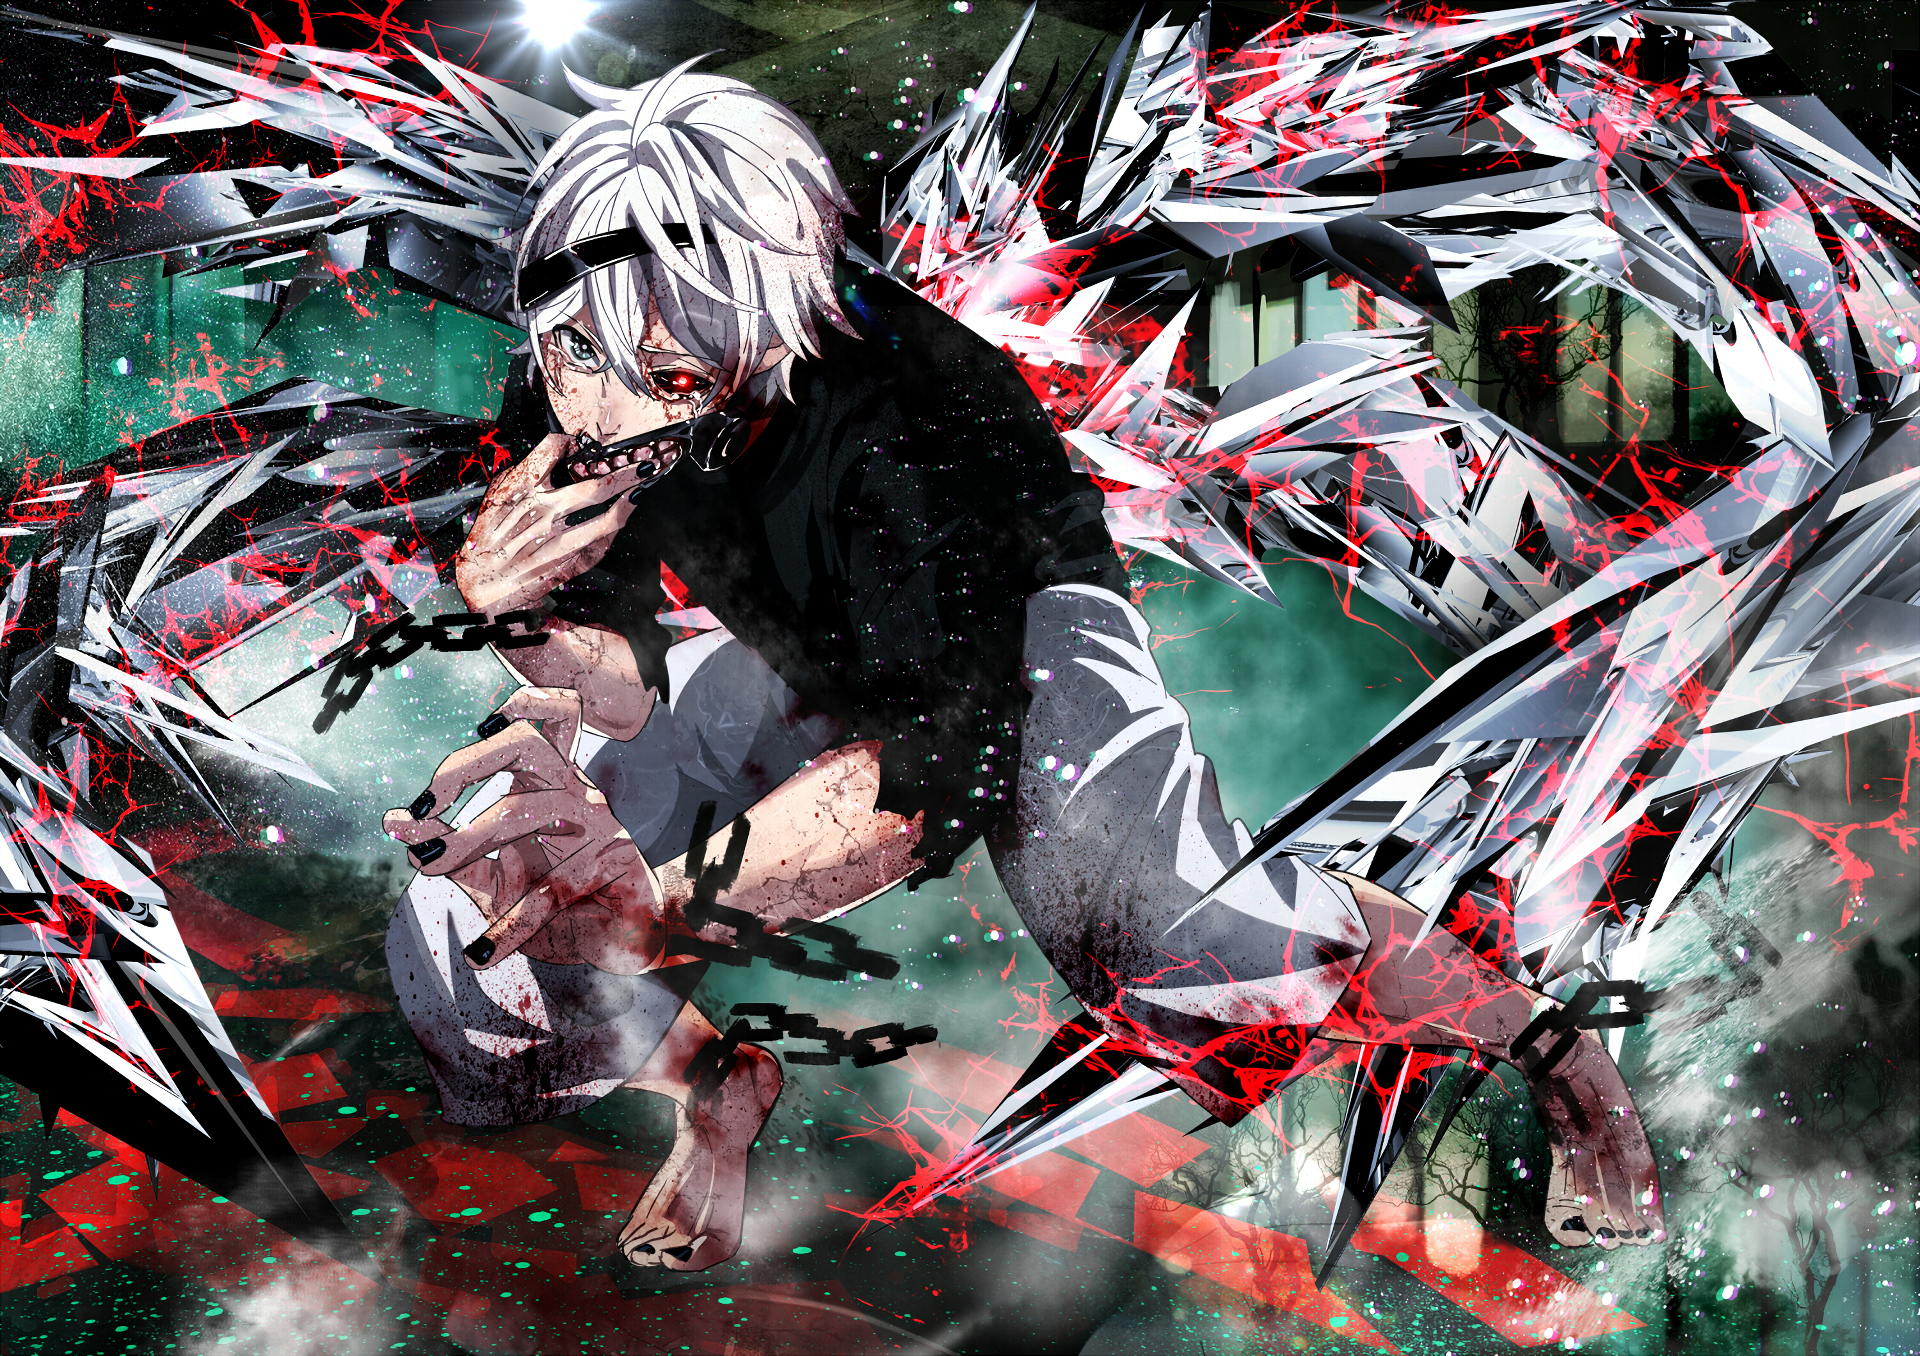 Anime Tokyo Ghoul Art by yuna